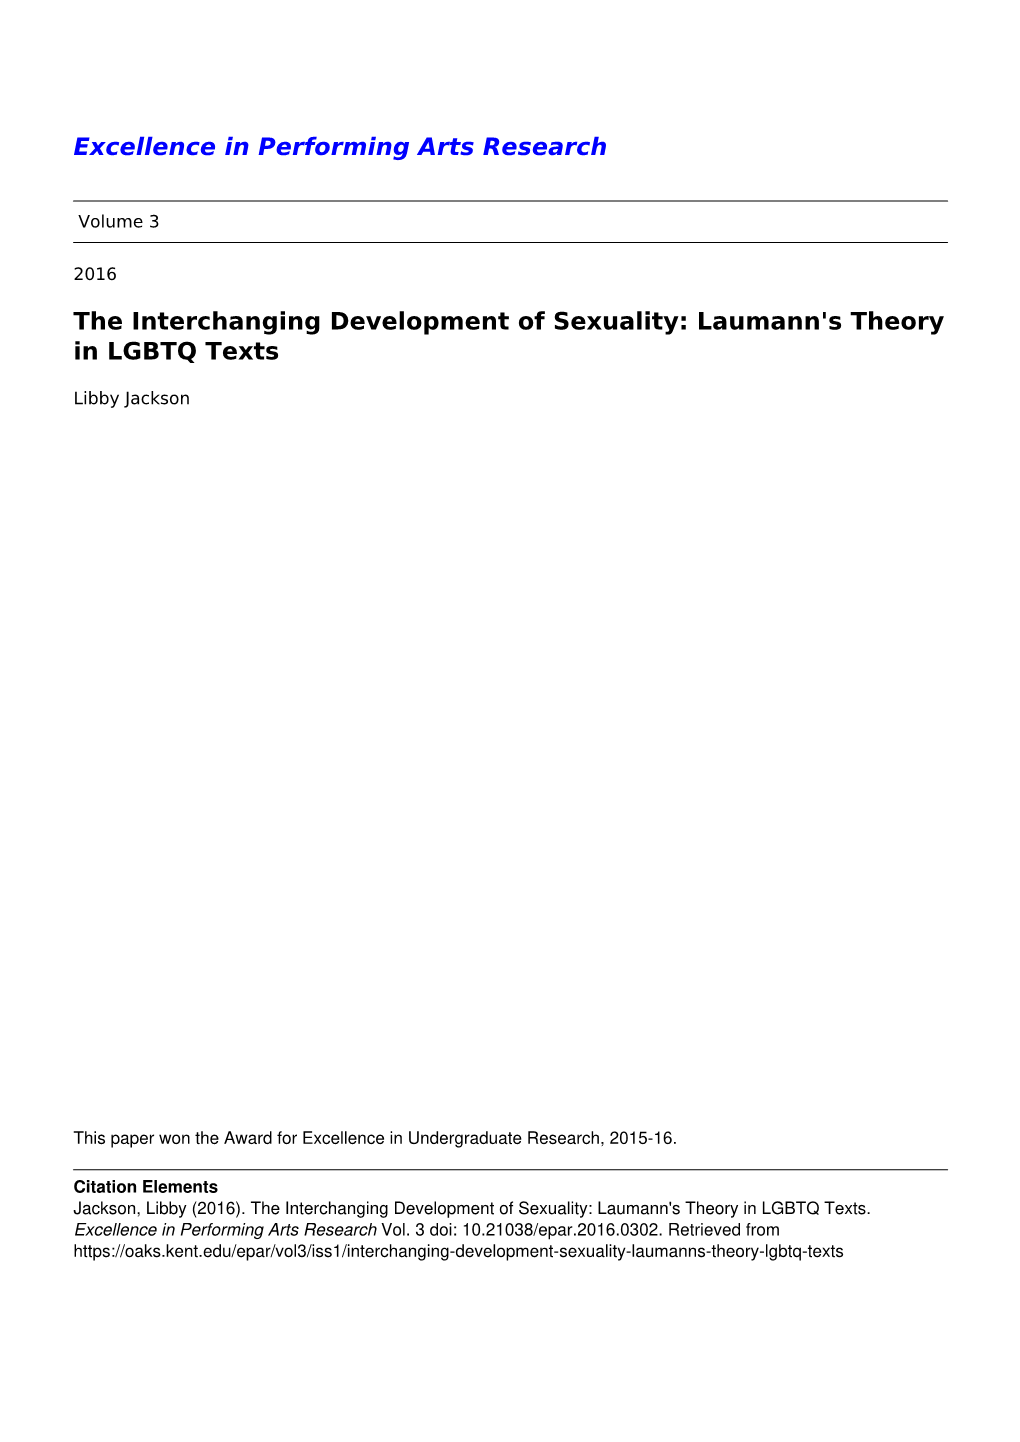 The Interchanging Development of Sexuality: Laumann's Theory in LGBTQ Texts